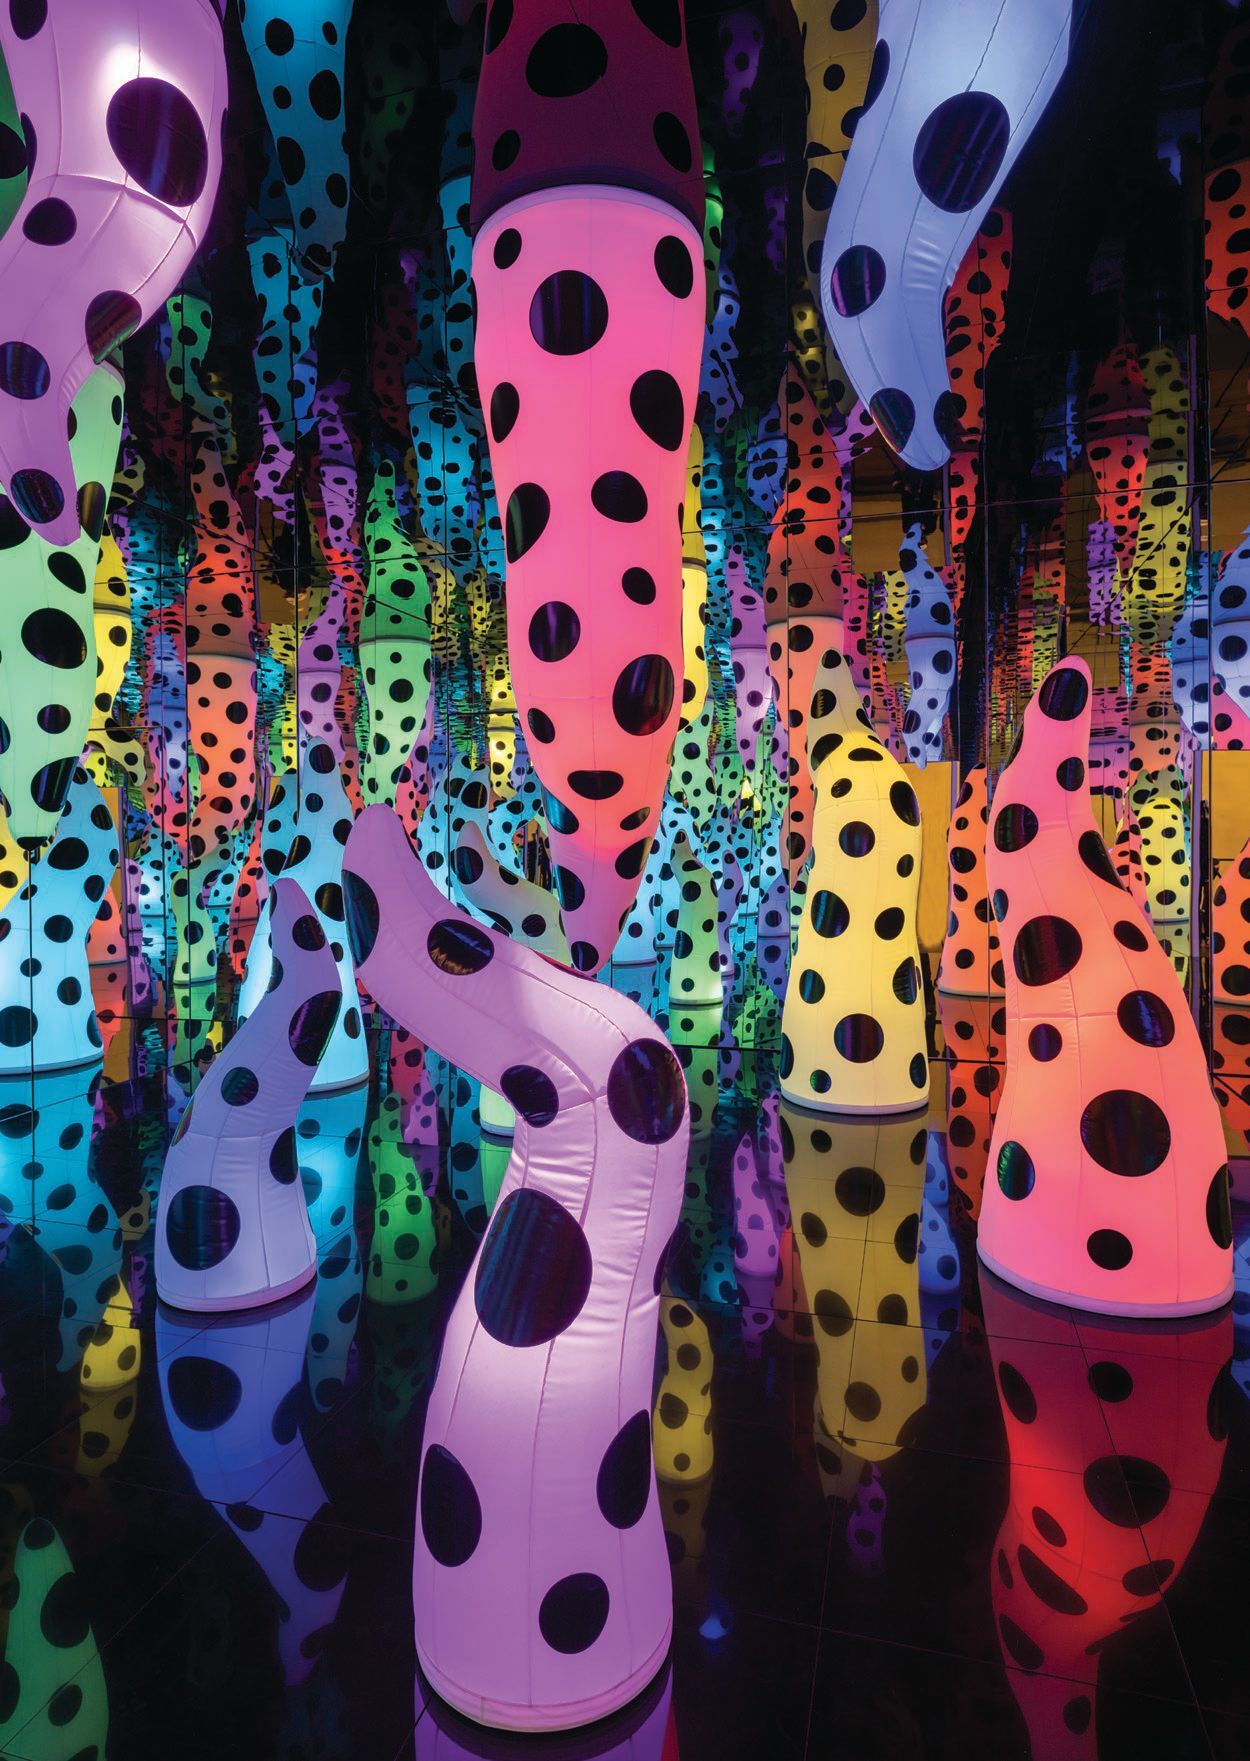 Yayoi Kusama, LOVE IS CALLING (2013, wood, metal, glass mirrors, tile, acrylic panel, rubber, blowers, lighting element, speakers and sound), 174 1/2 inches by 340 5/8 inches by 239 3/8 inches), Institute of Contemporary Art/Boston. Acquired through the generosity of Barbara Lee/The Barbara Lee Collection of Art by Women, Fotene Demoulas and Tom Coté, Hilary and Geoffrey Grove, Vivien and Alan Hassenfeld, Jodi and Hal Hess, Barbara H. Lloyd and an anonymous donor. PHOTO BY ORIOL TARRIDAS/© YAYOI KUSAMA/COURTESY OF PÉREZ ART MUSEUM MIAMI